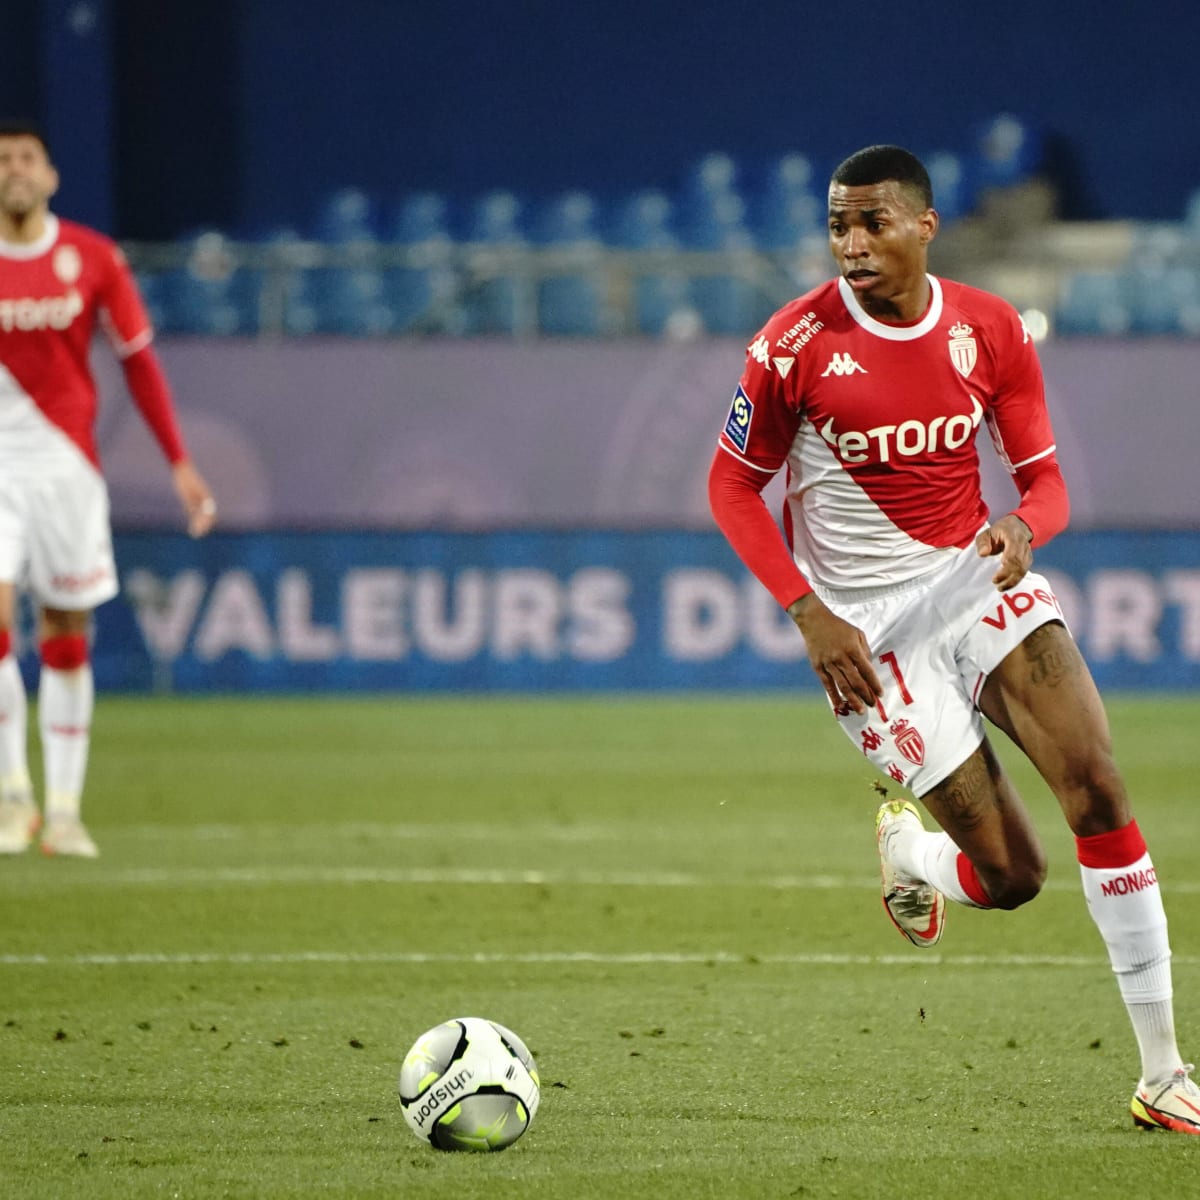 Watch AS Monaco vs RC Lens Stream Ligue 1 live, TV channel - How to Watch and Stream Major League and College Sports